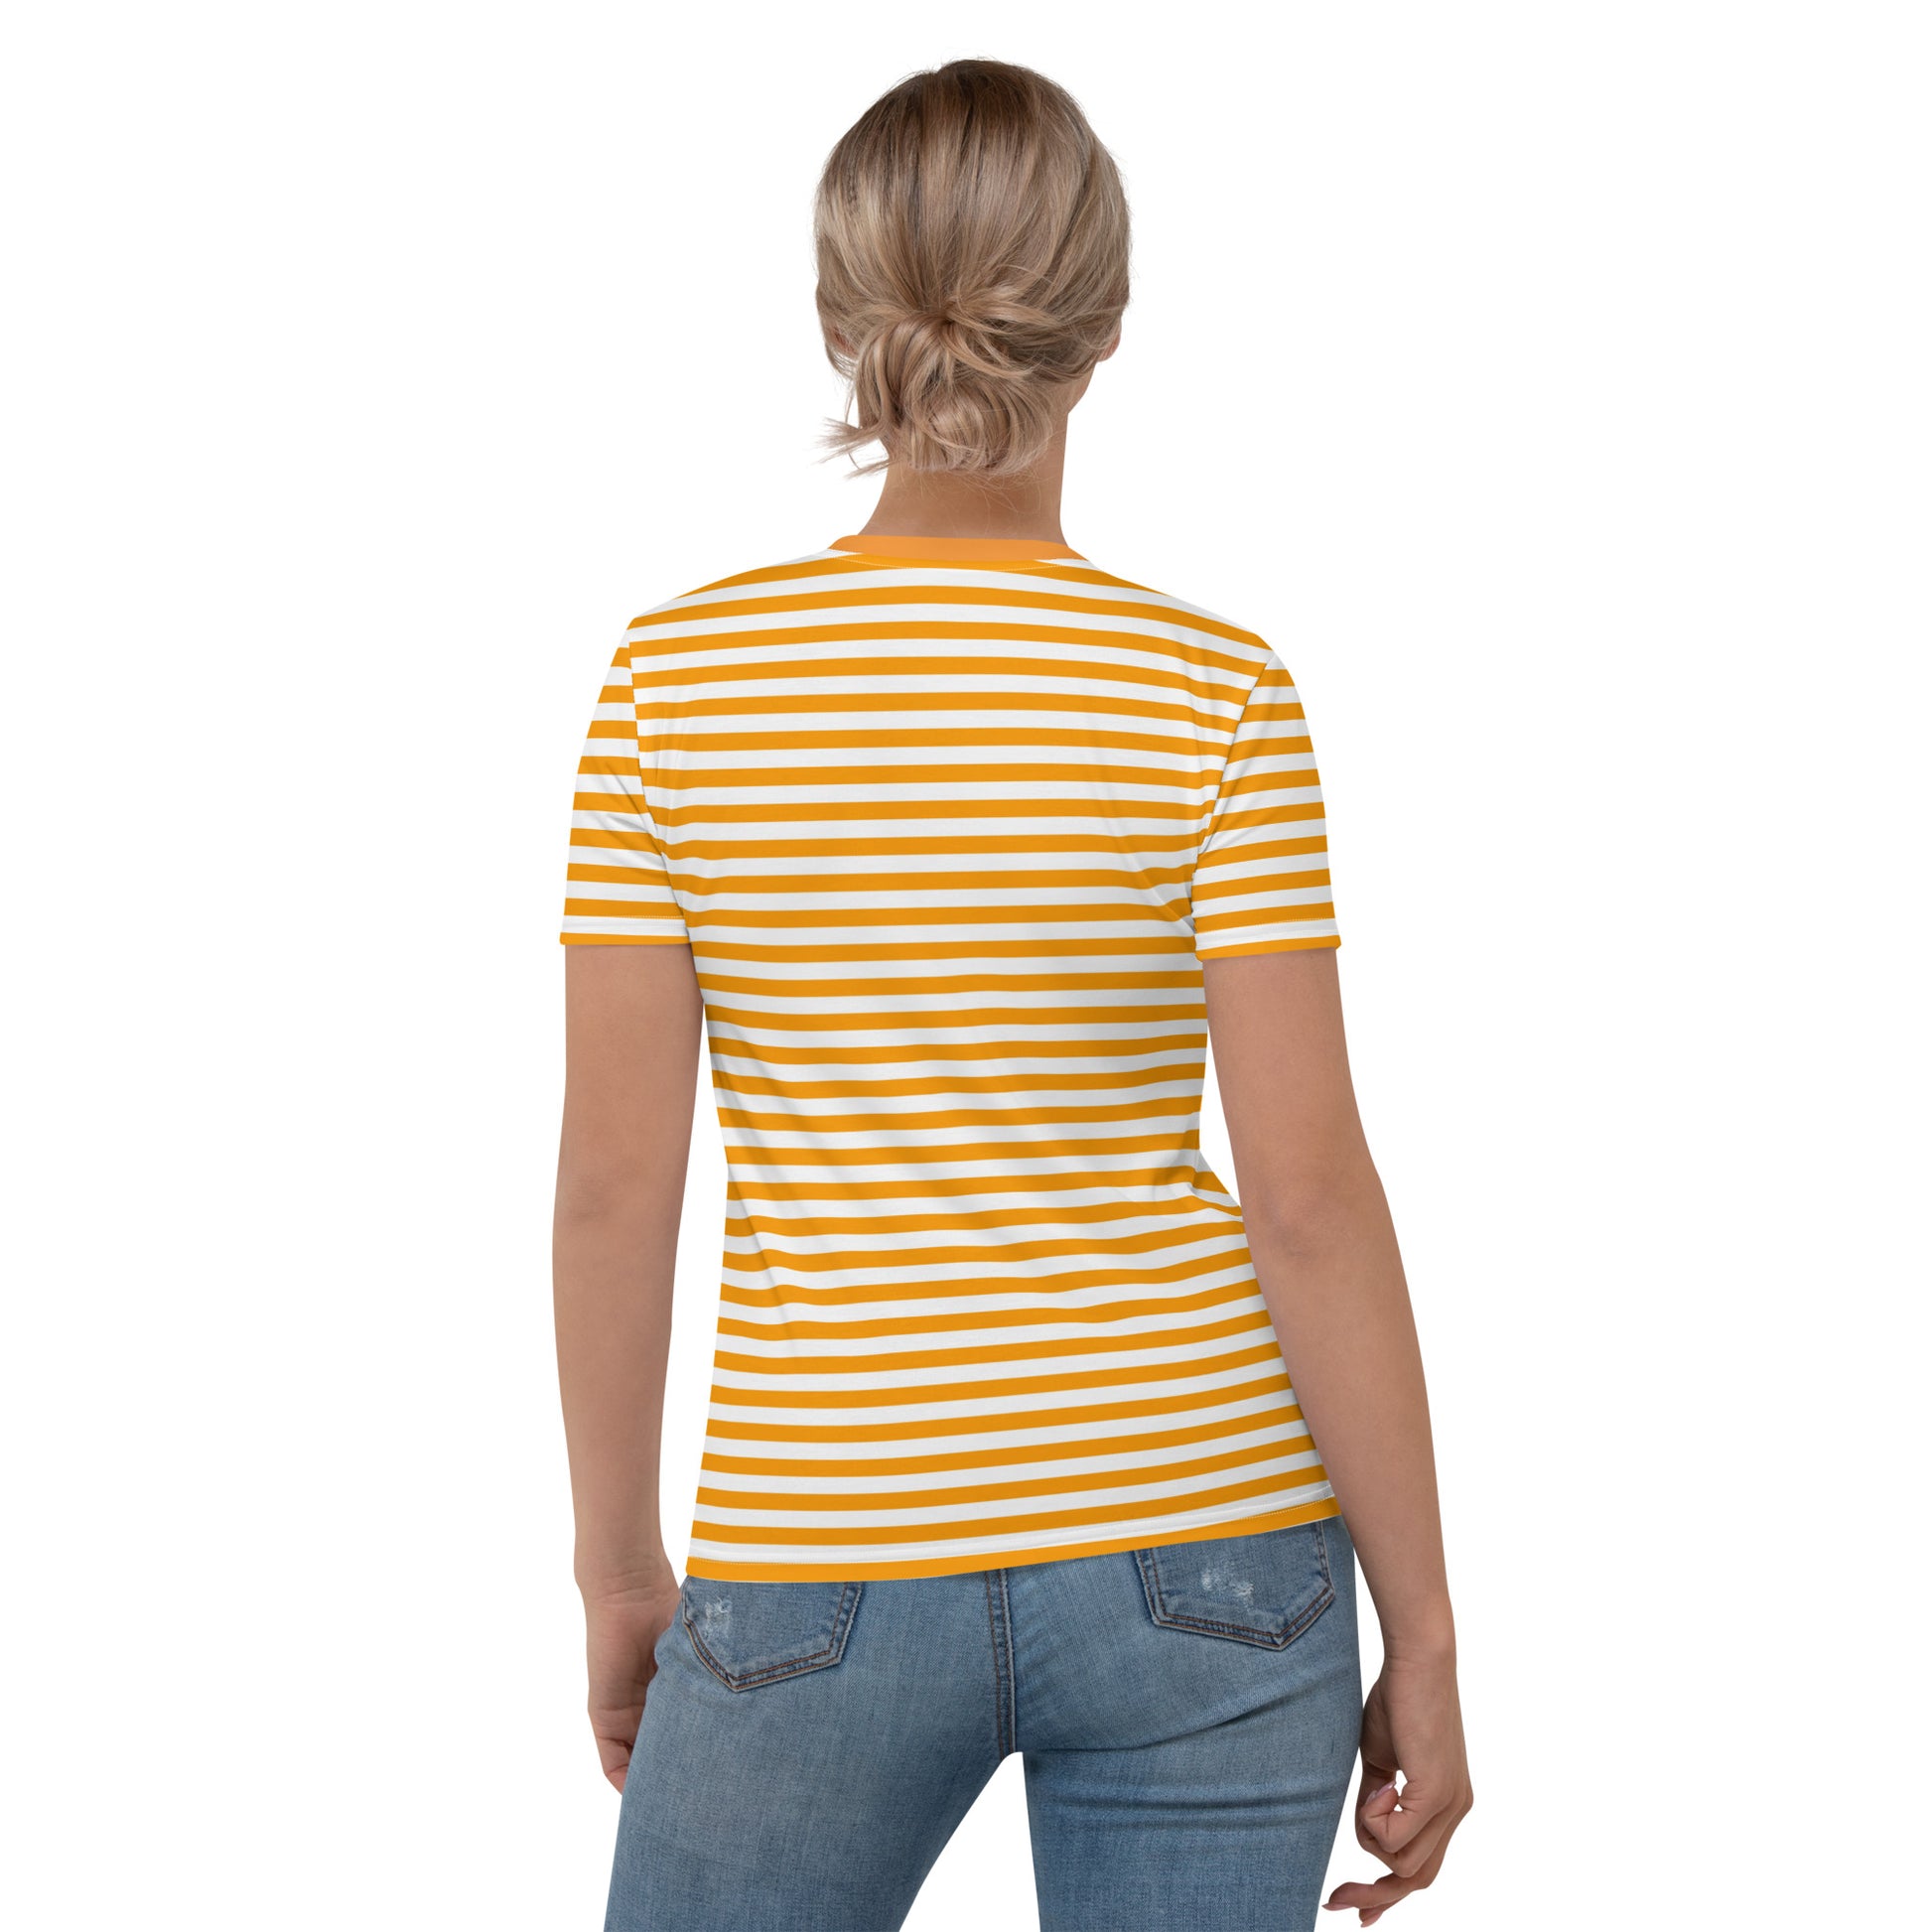 Striped t-shirt for women in orange and white